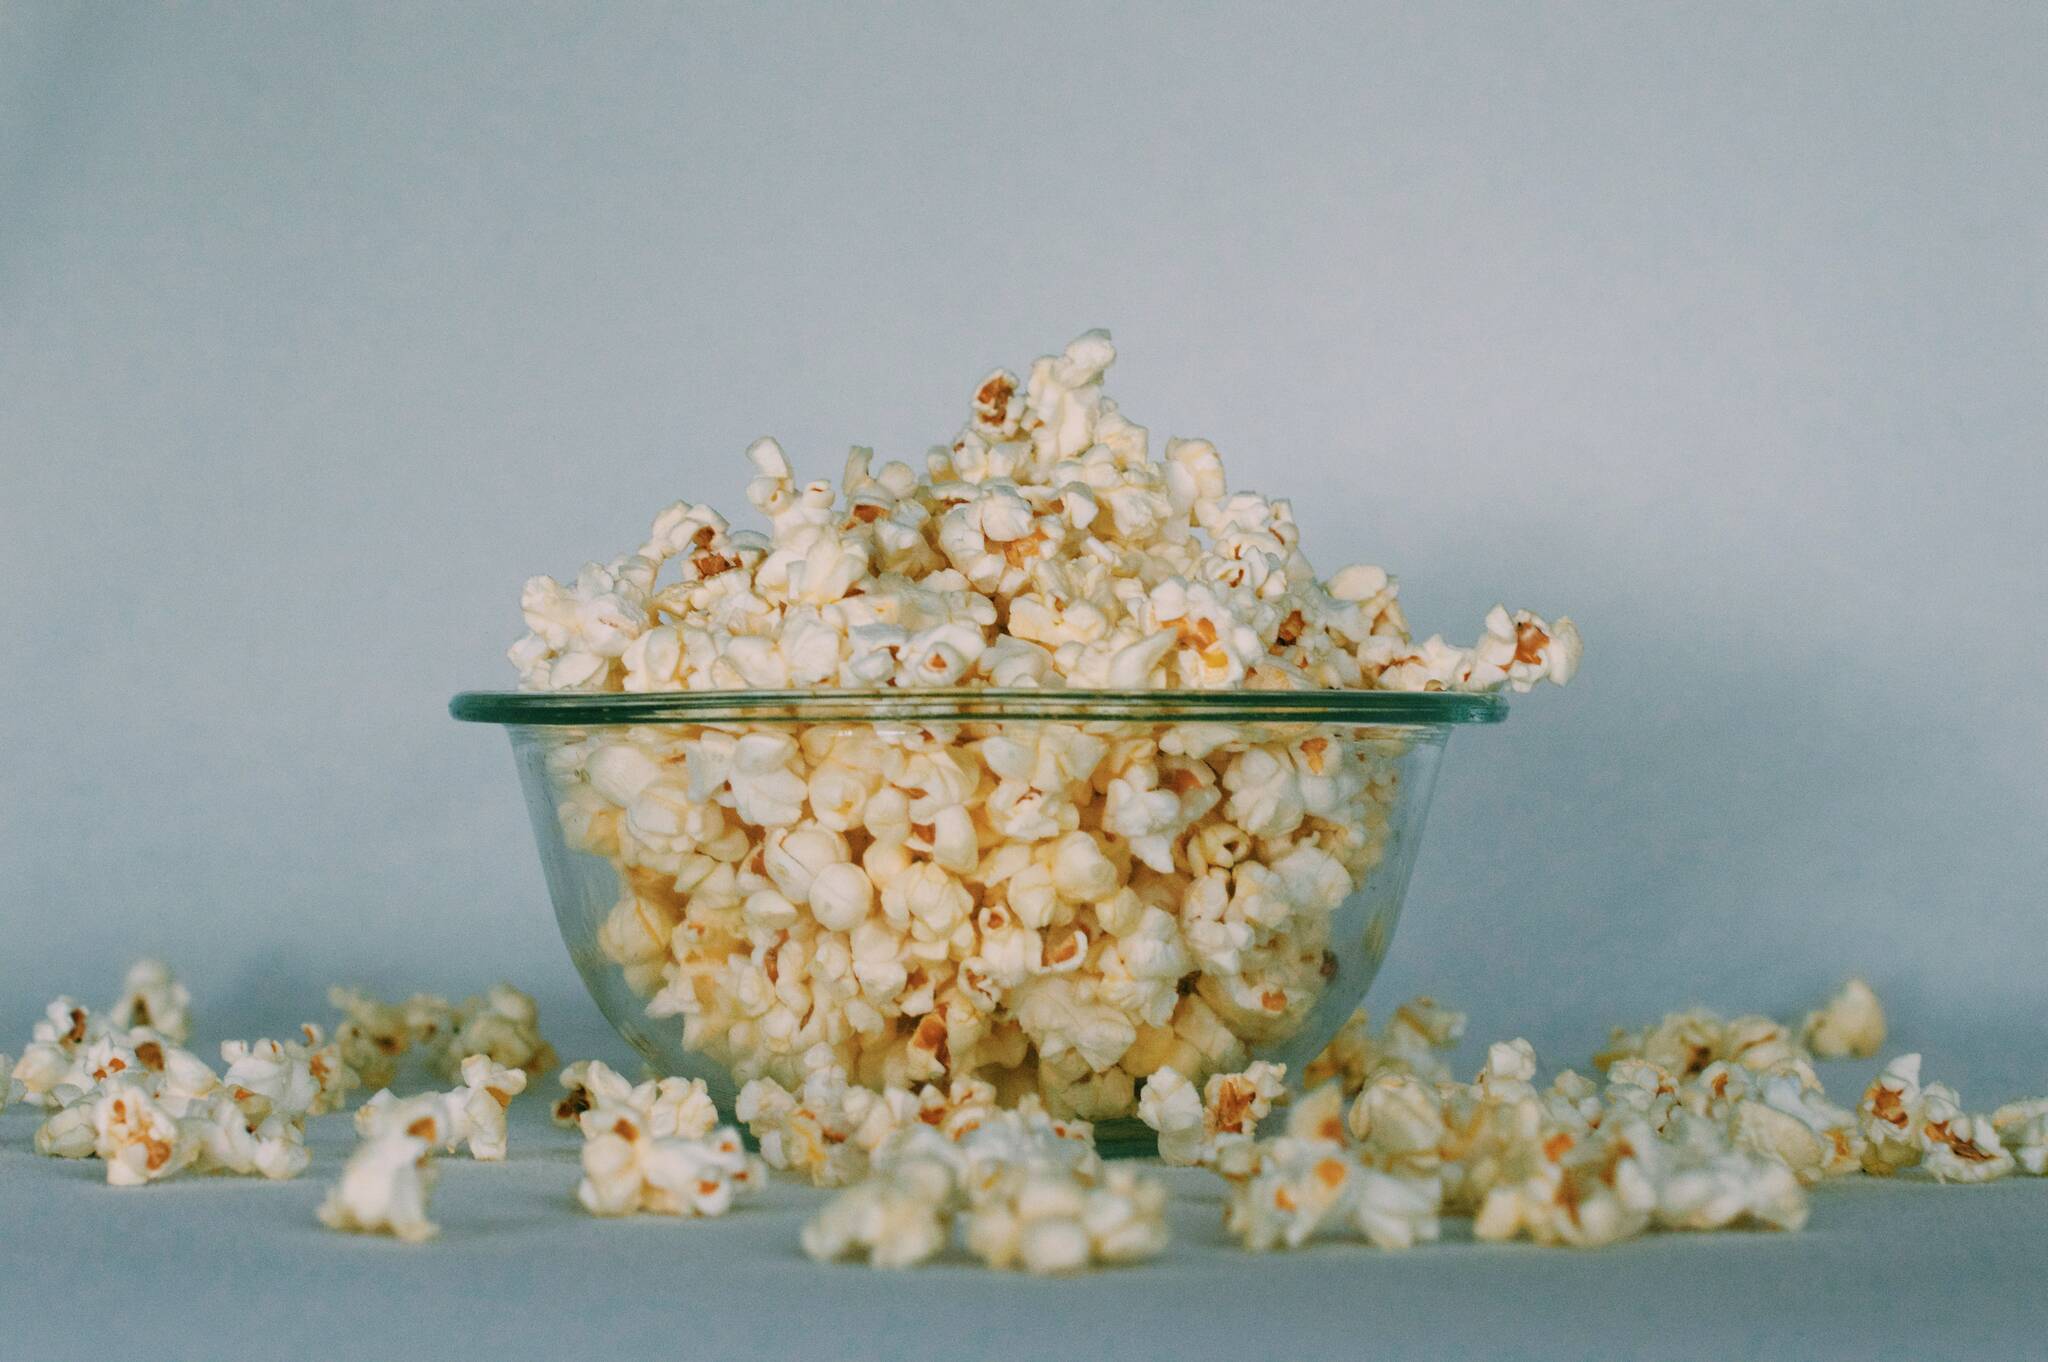 This photo shows a bowl of popcorn. "I love popcorn. When I play those ice-breaker games where you introduce yourself and name a favorite food, I always say, 'Peggy, popcorn.' writes Peggy McKee Barnhills. "It has a pleasing alliteration, making it easy for people to remember my name. Plus, it’s the truth. I love popcorn." (Georgia Vagim / Unsplash)